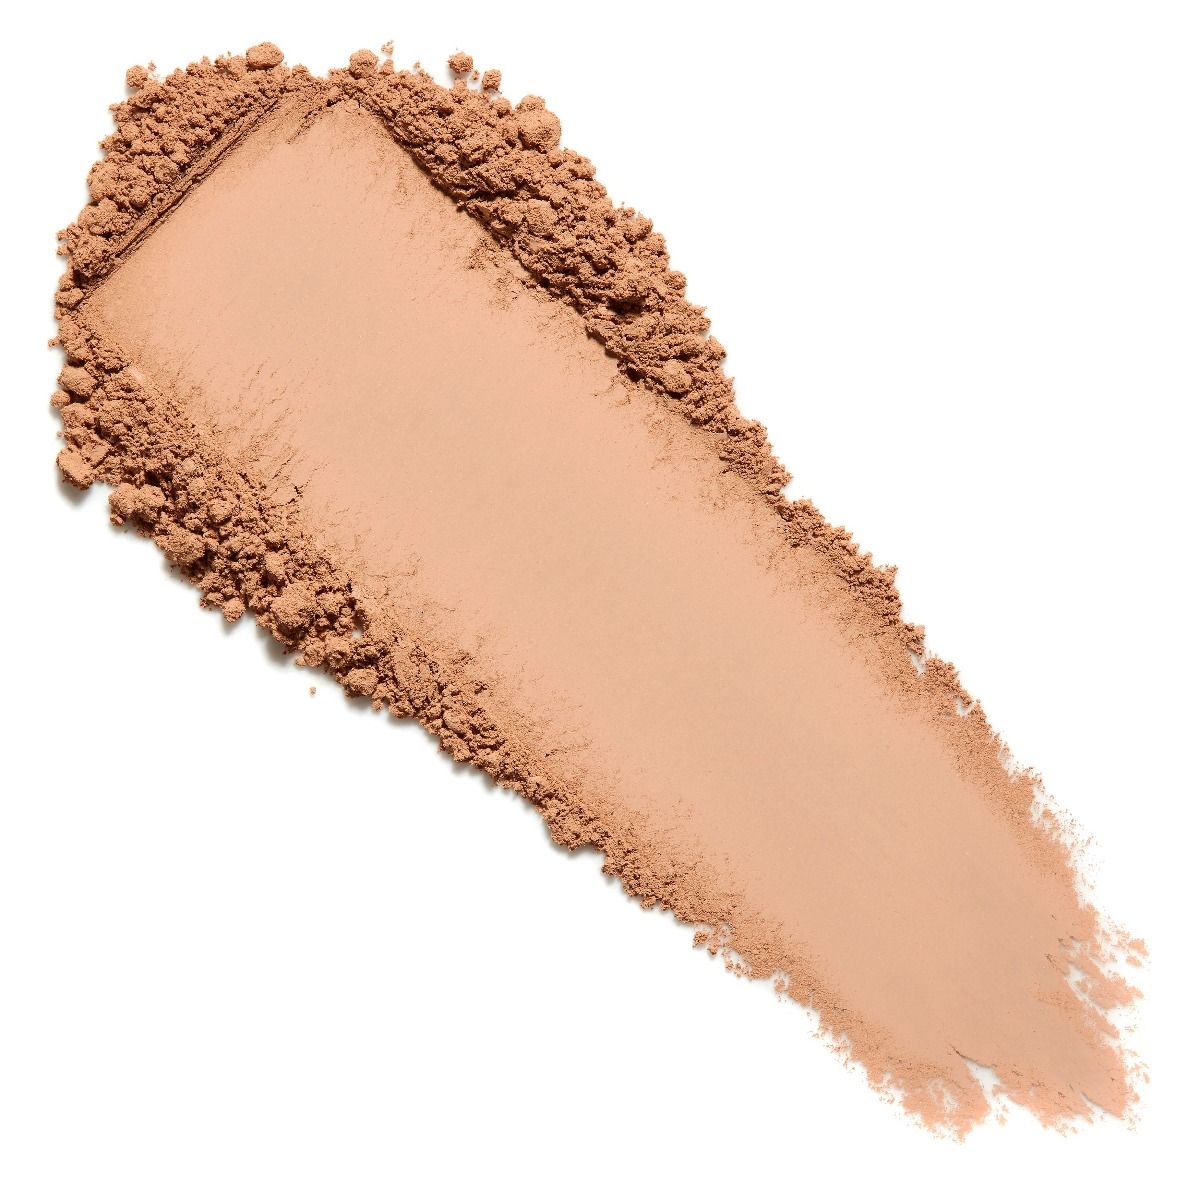 Lily Lolo Coffee Bean Mineral Foundation: Gluten free, vegan. A tan foundation shade with warm undertones.